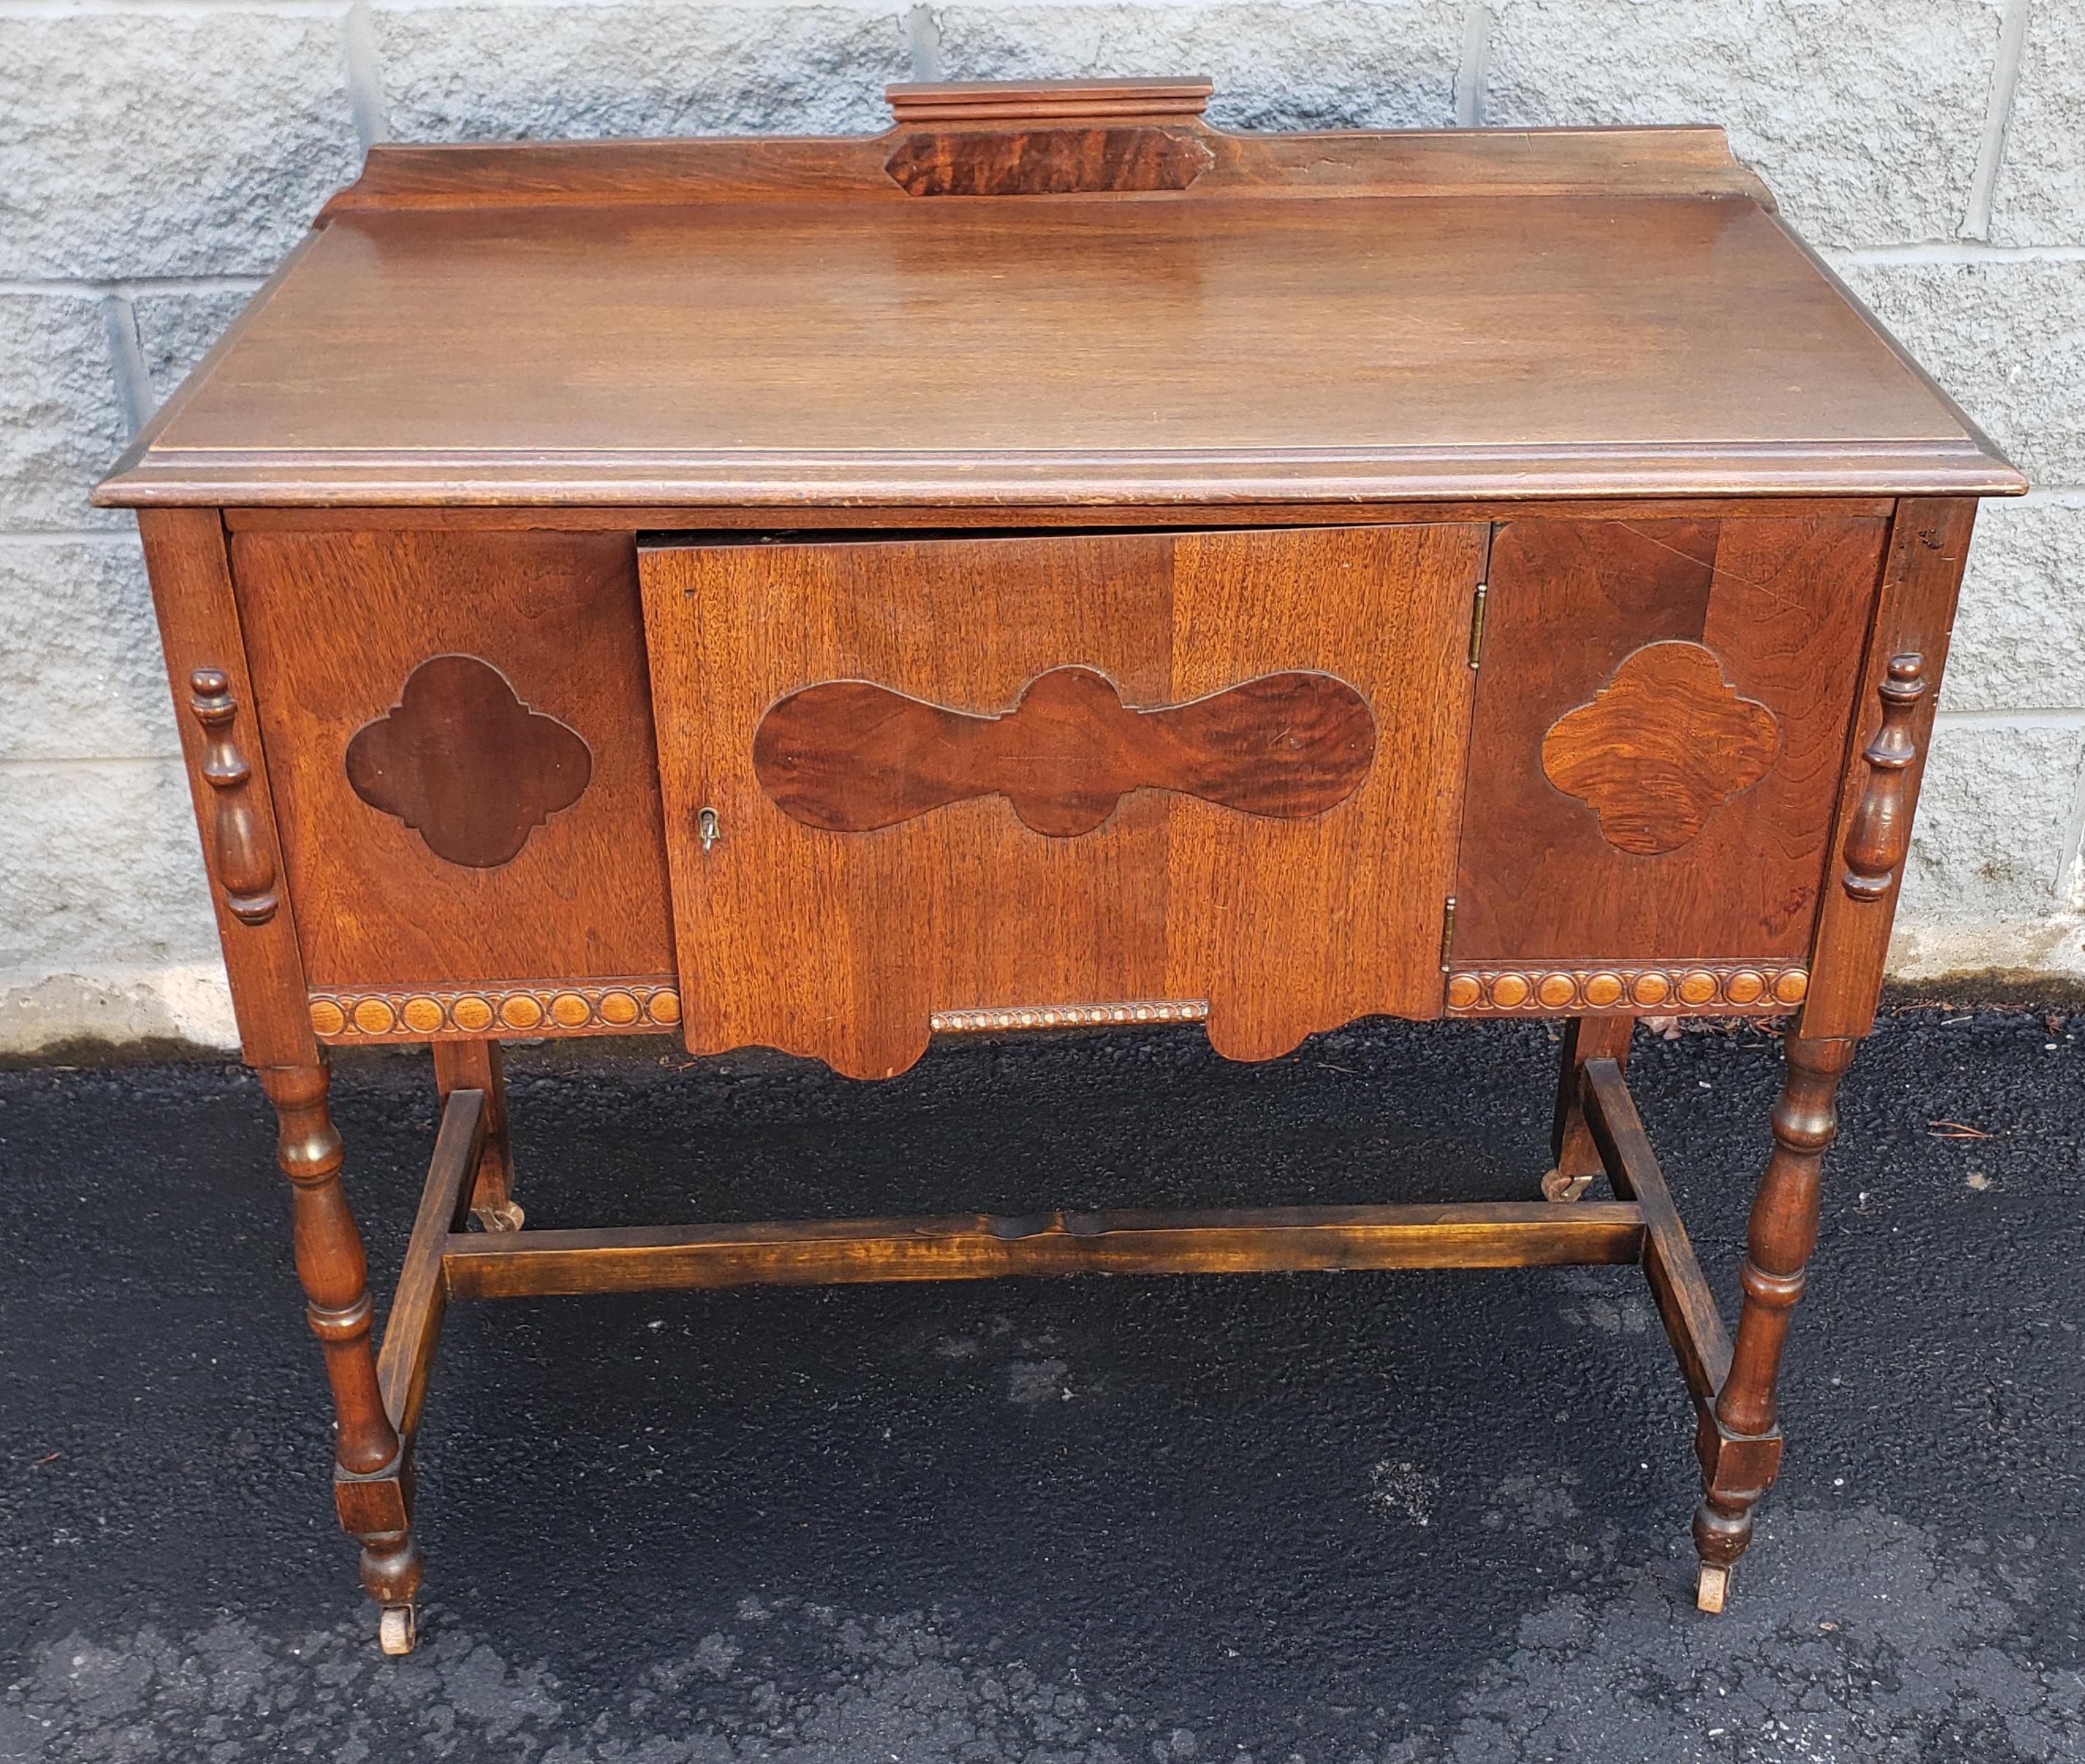 A gorgeous 1930s Art Deco rolling mahogany credenza buffet server by the famous Gettysburg Furniture Co.
Great vintage condition. Unbeliebly light weight on original wheels. Original Key present but really functional.
Measures: 38